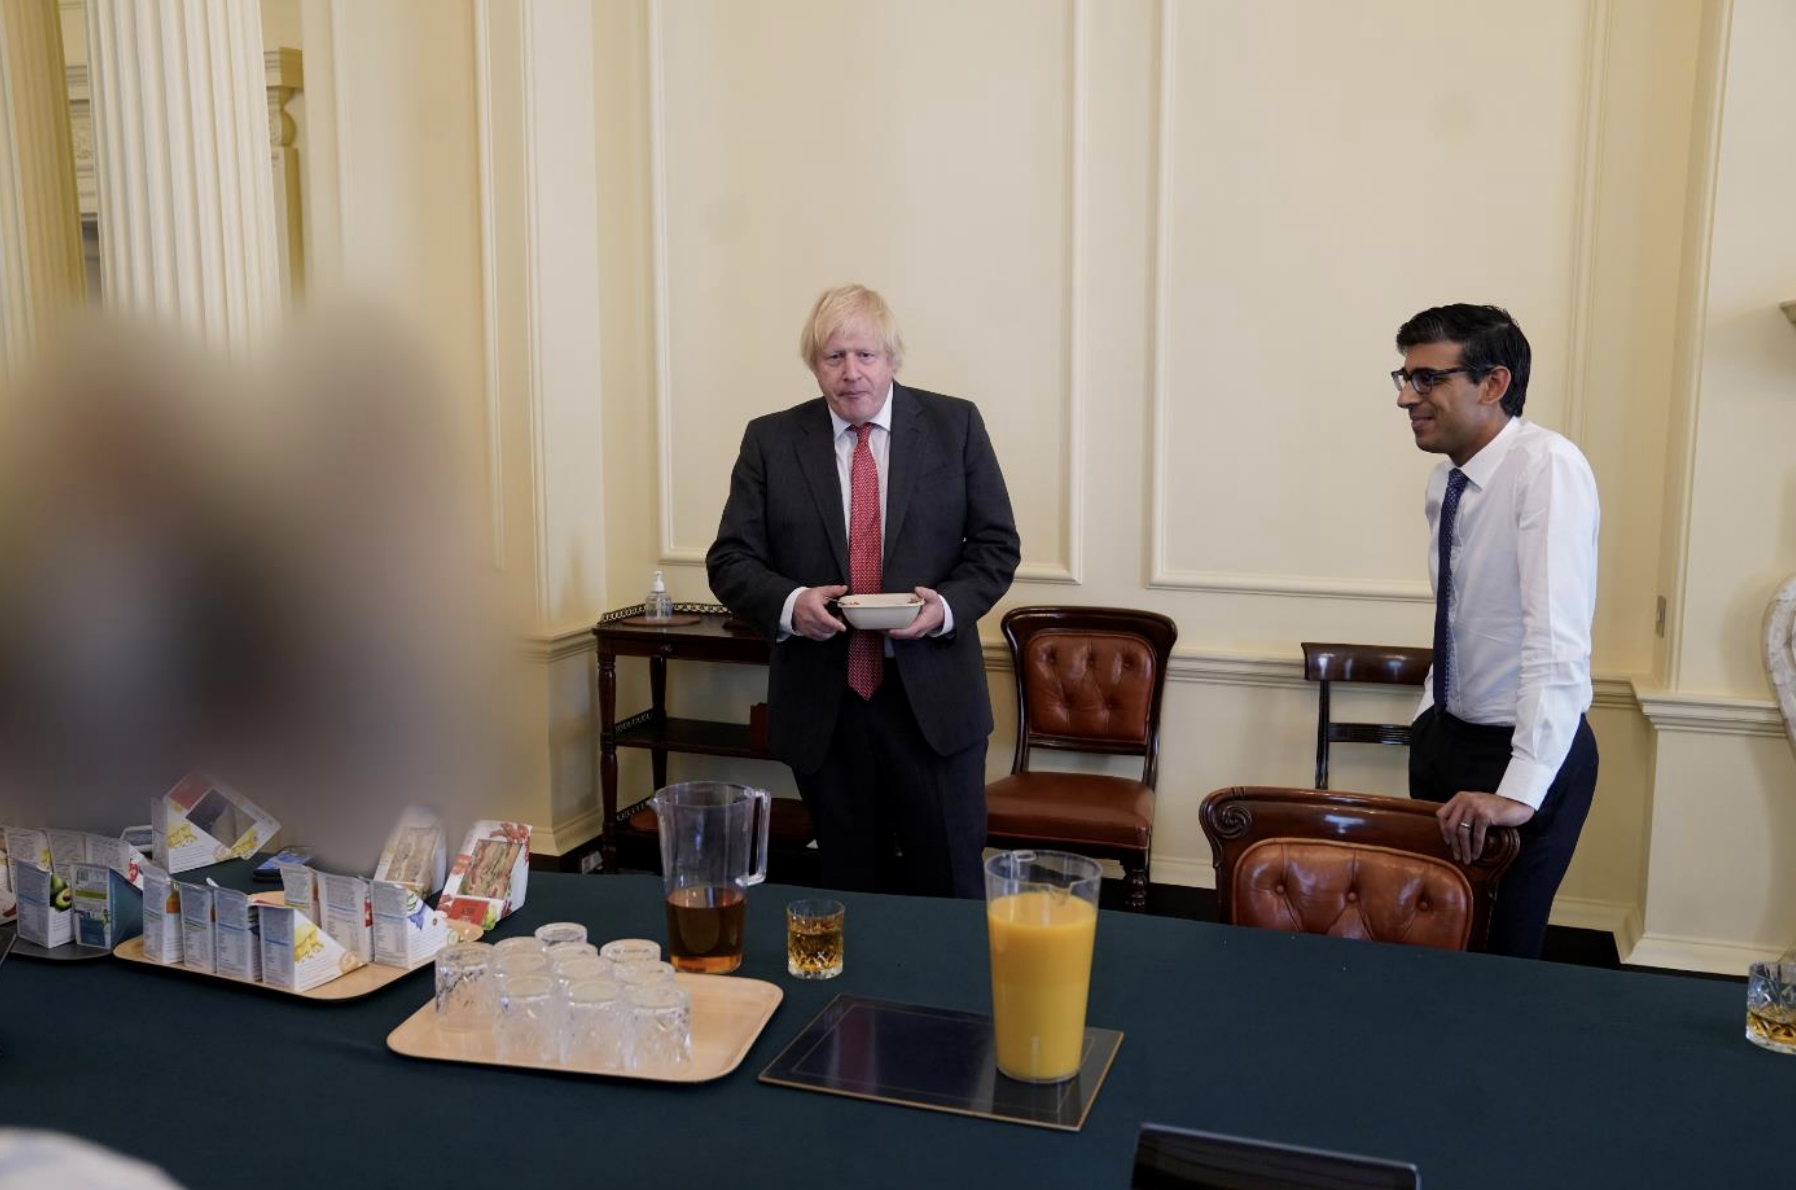 19 June 2020; a gathering in the Cabinet Room in No 10 Downing Street on the Prime Minister's birthday. Sue Gray report.